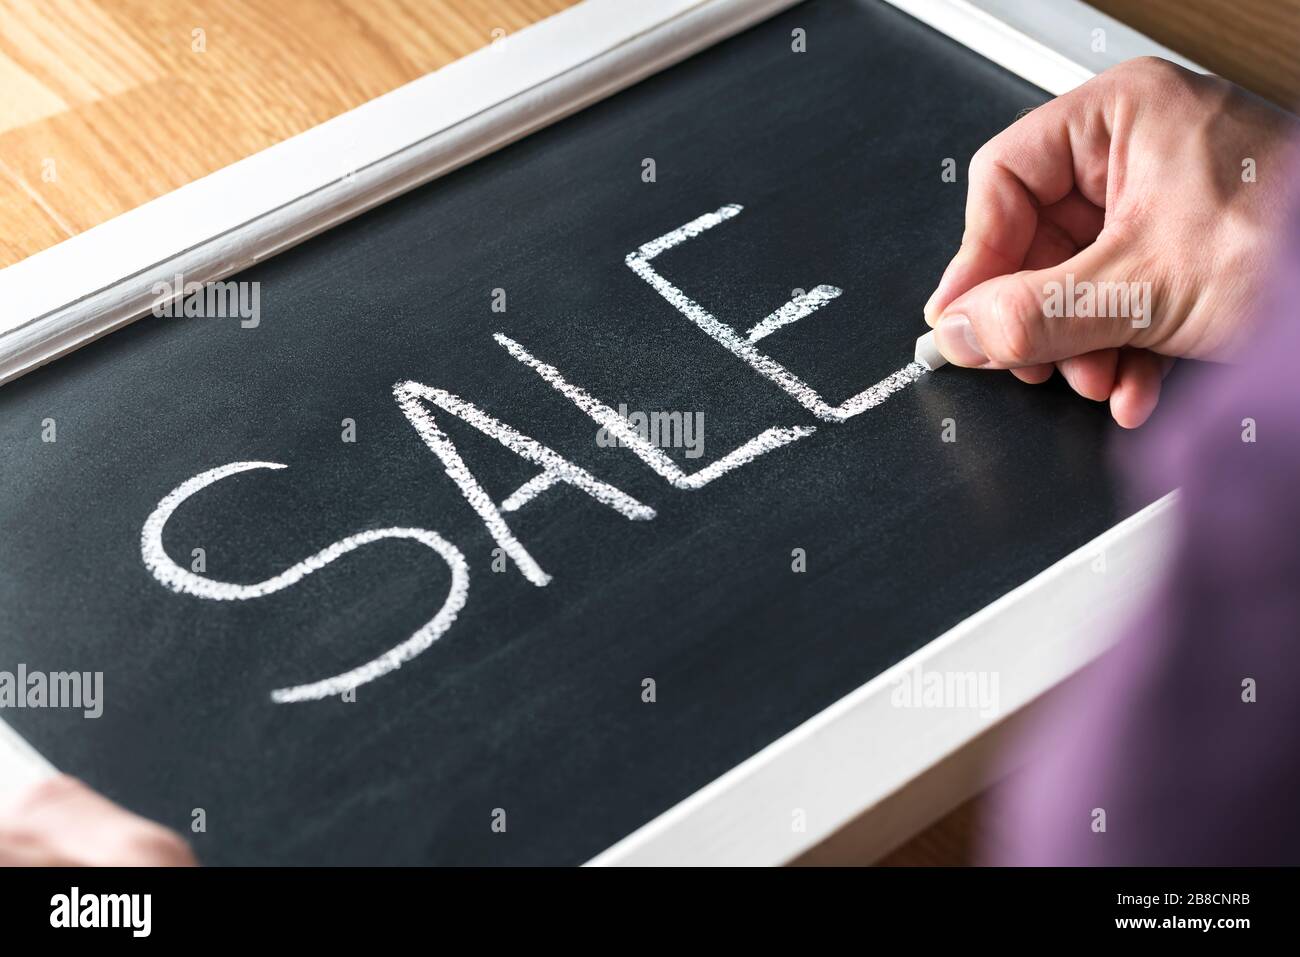 Sale blackboard banner in store, shop or marketplace to promote bargain prices or clearance. Small business owner, salesman or assistant writing text. Stock Photo